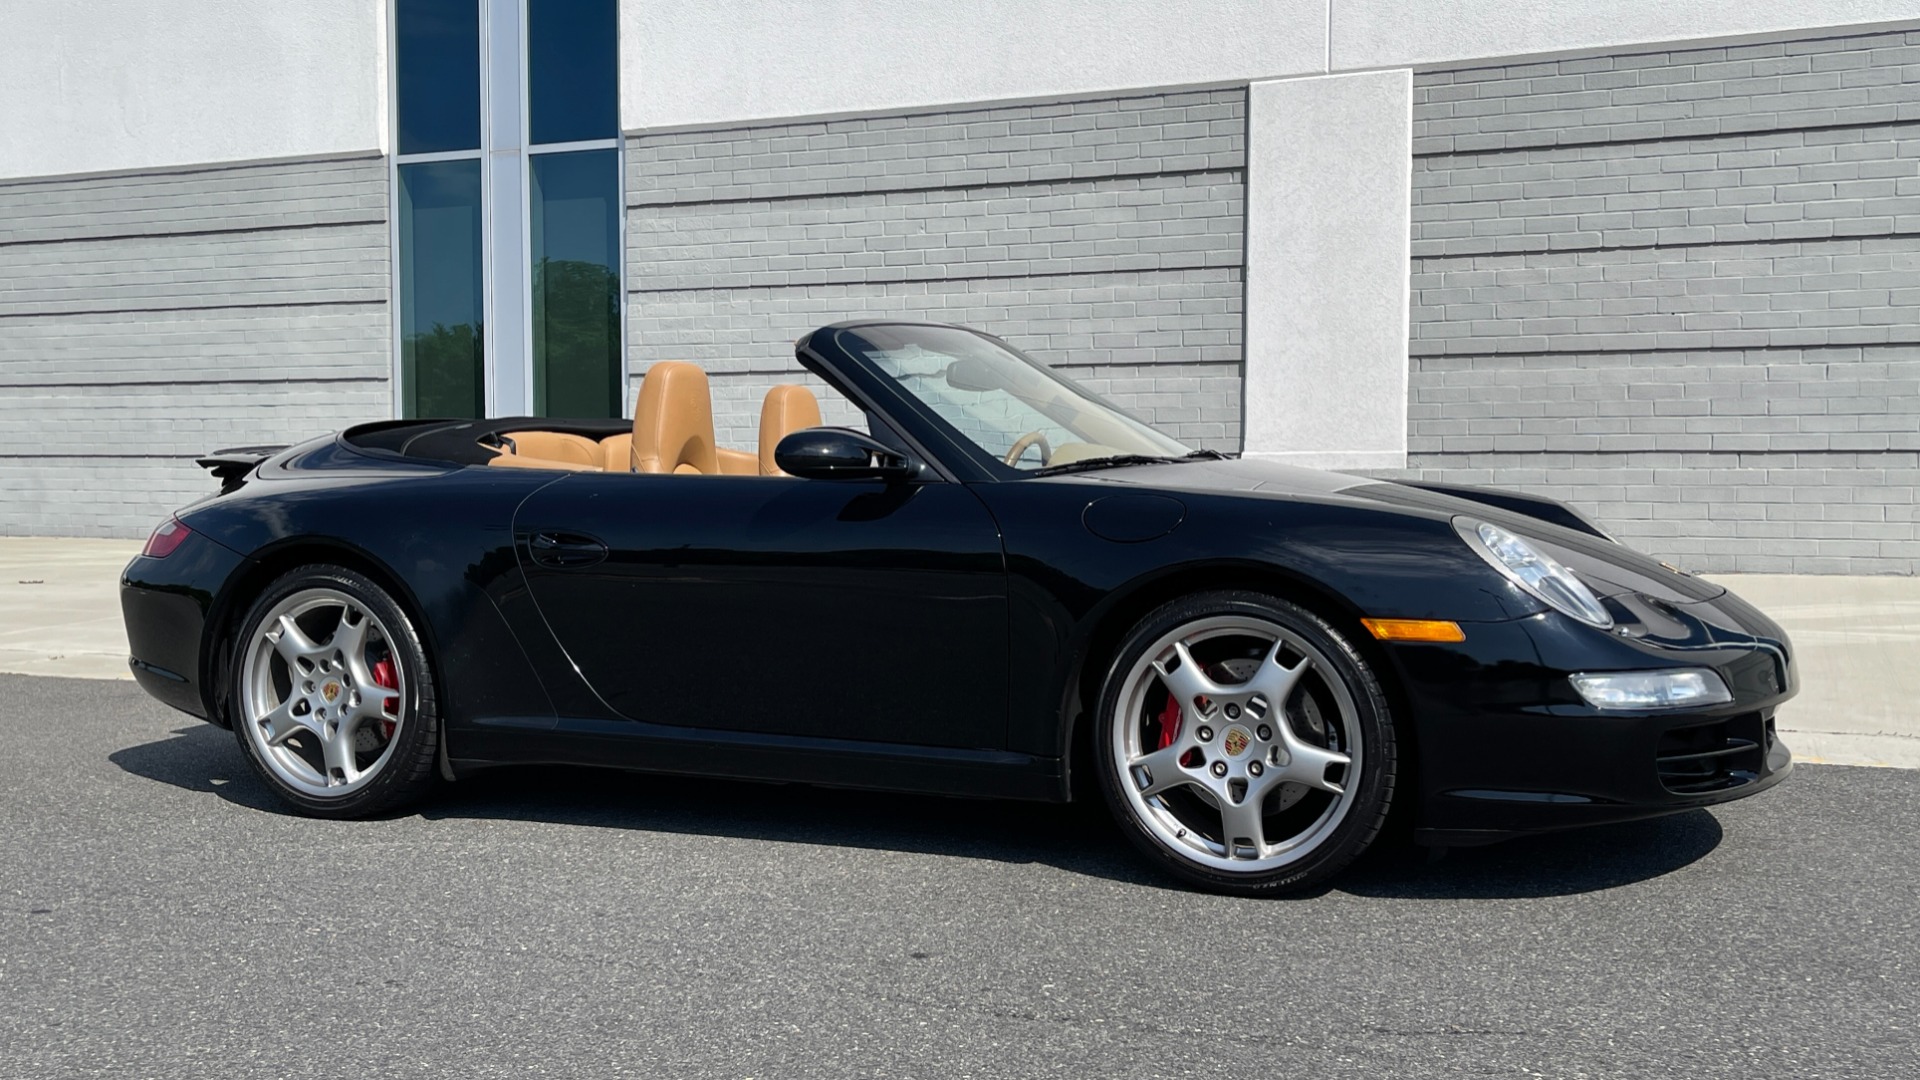 Used 2006 Porsche 911 CARRERA S CABRIOLET / BOSE / CD CHANGER / PWR SEAT PKG / HTD STS for sale $60,999 at Formula Imports in Charlotte NC 28227 2